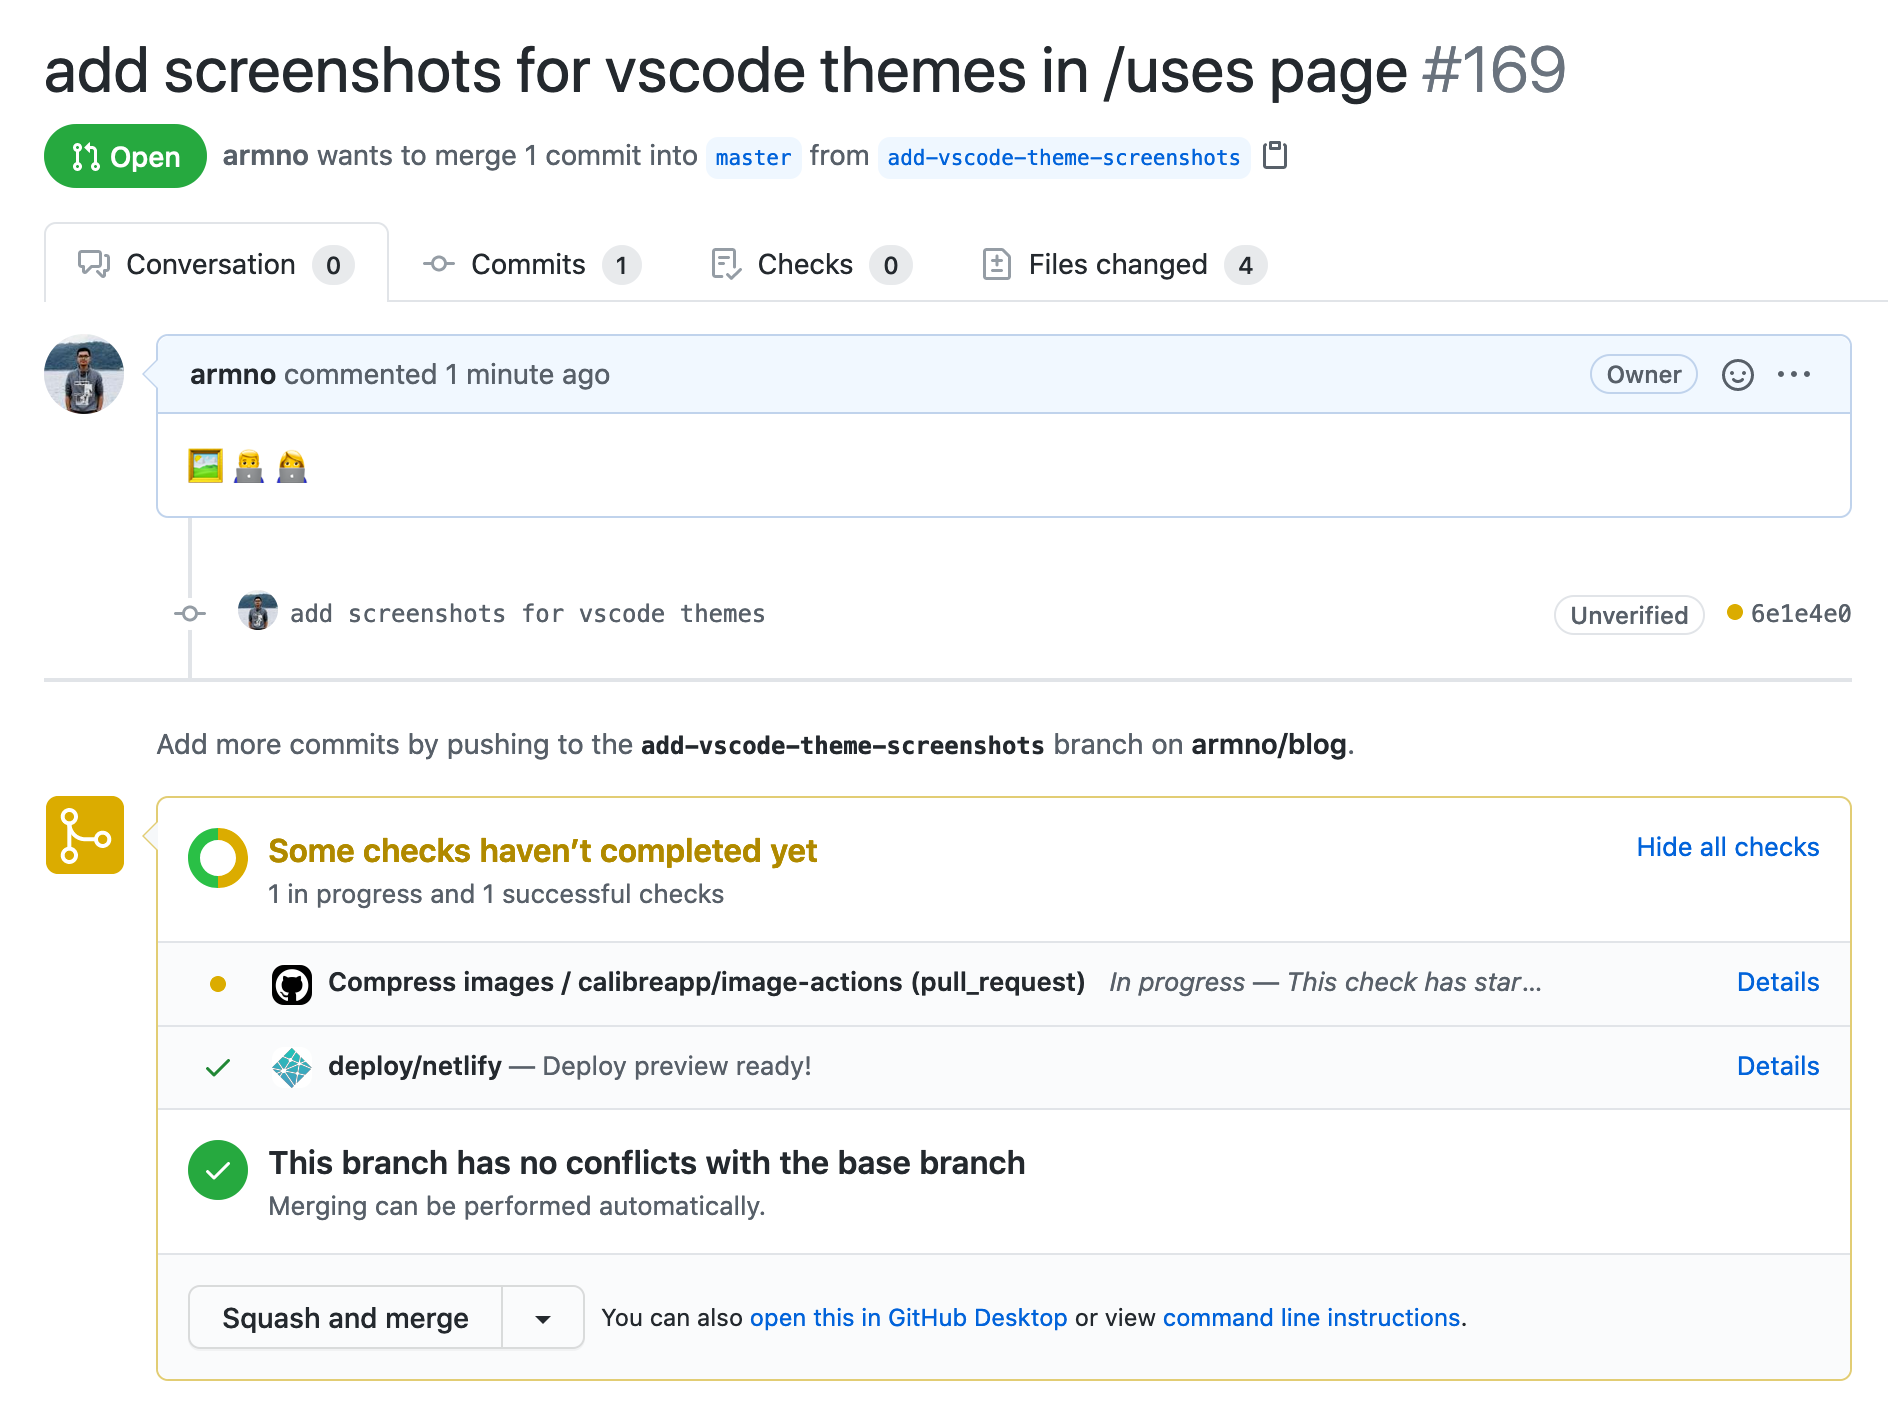 A new pull request is created